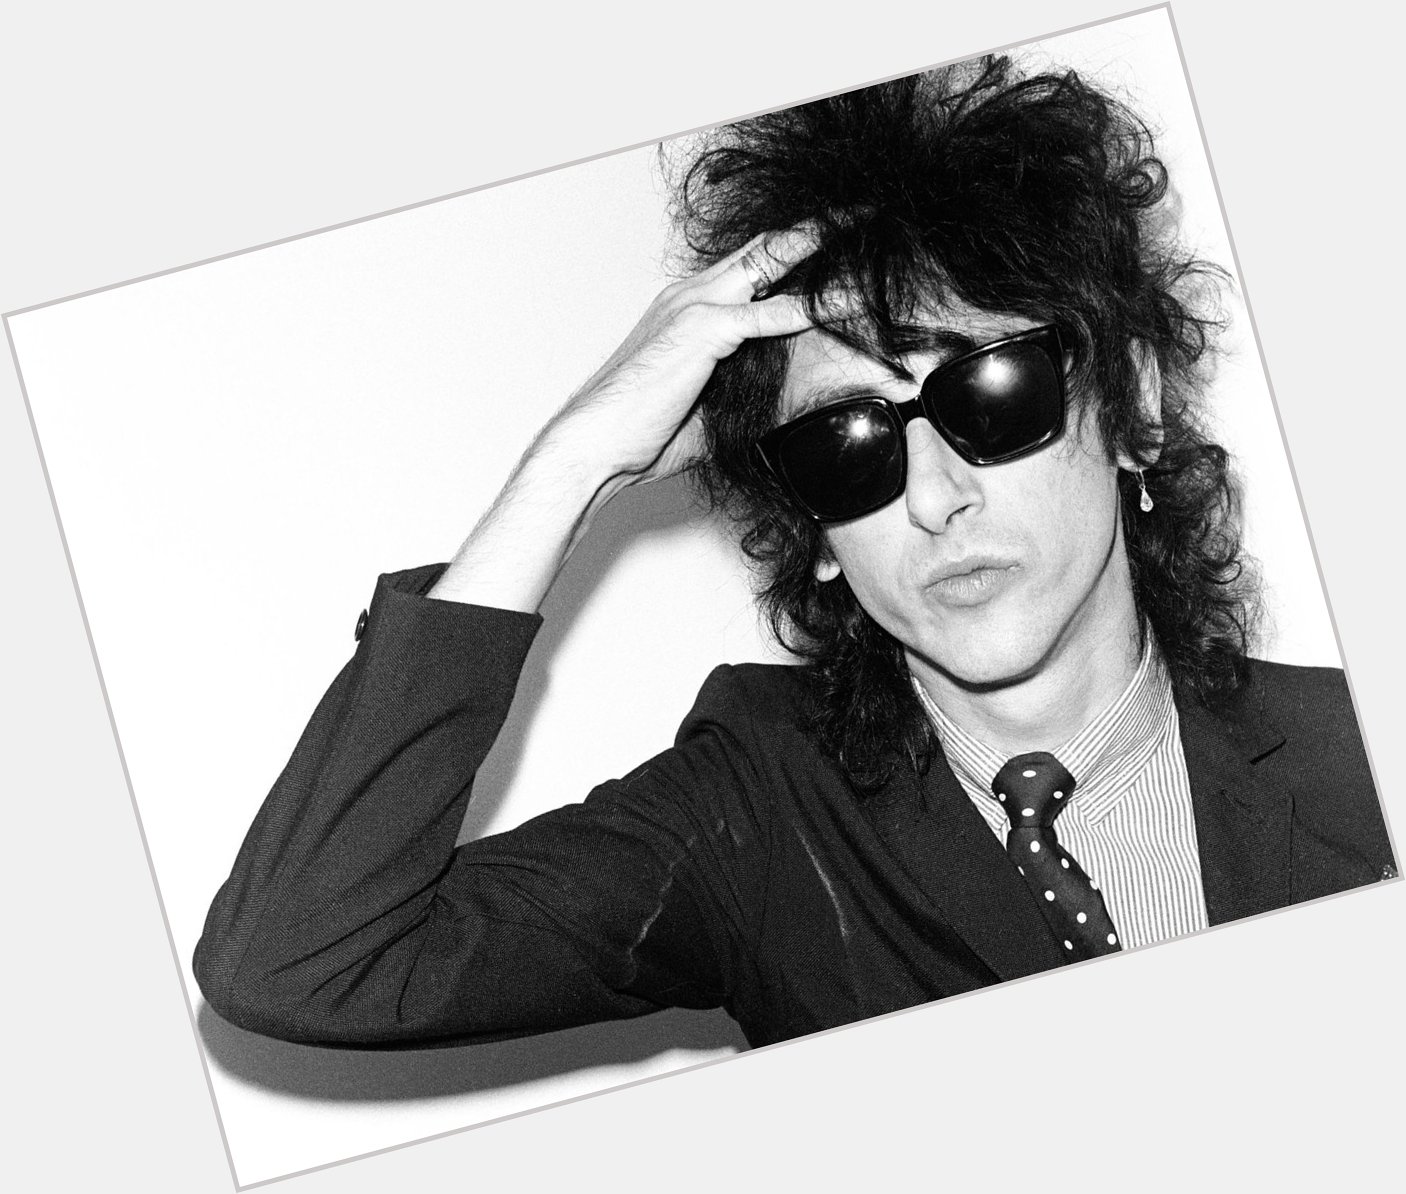 Happy Birthday to legendary punk poet John Cooper Clarke, born on this day in Salford, Lancashire in 1949.  